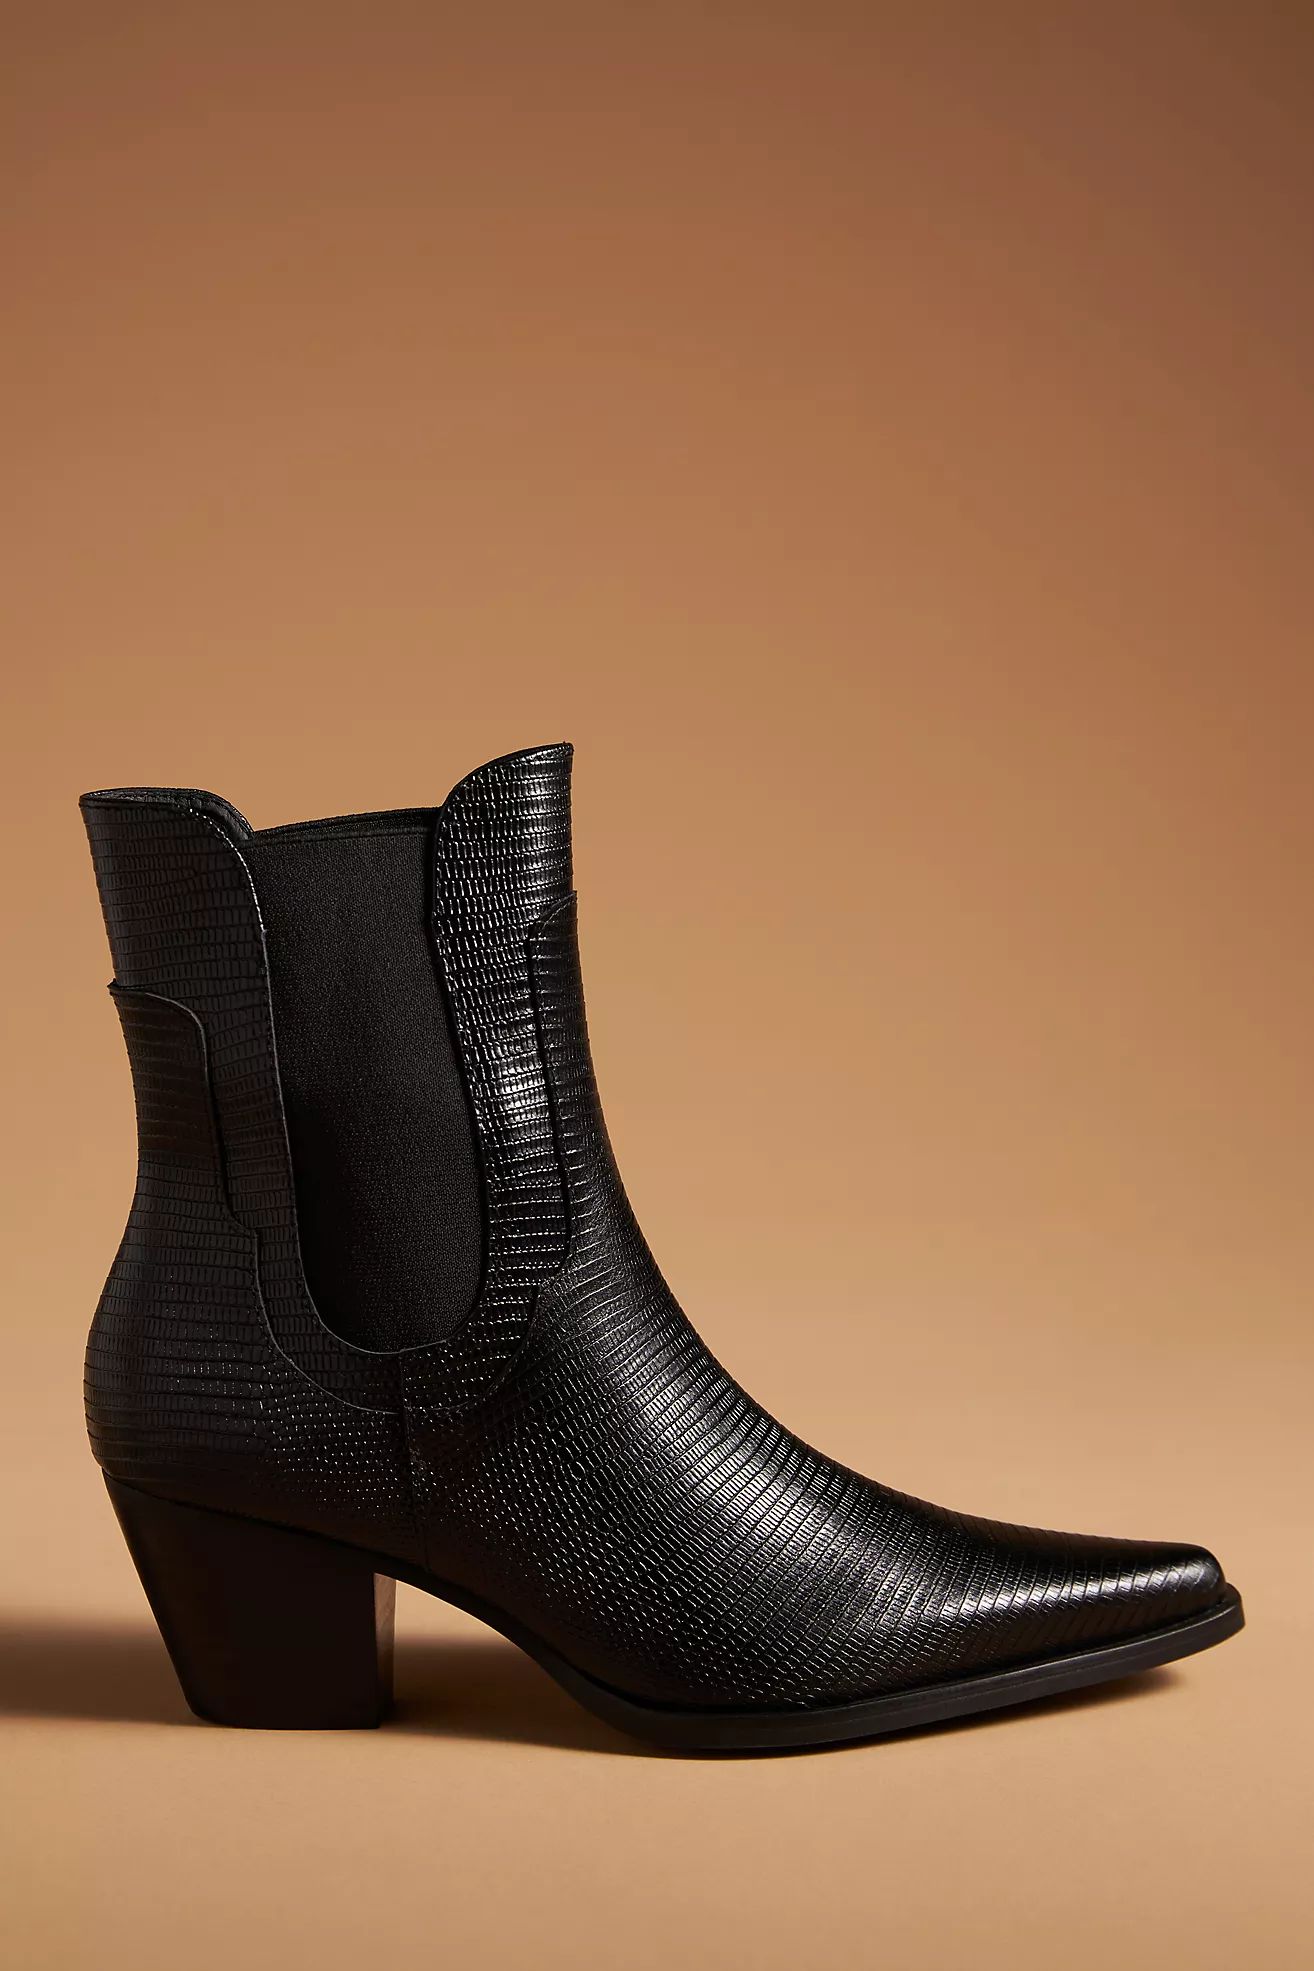 Intentionally Blank Deputy Boots | Anthropologie (US)